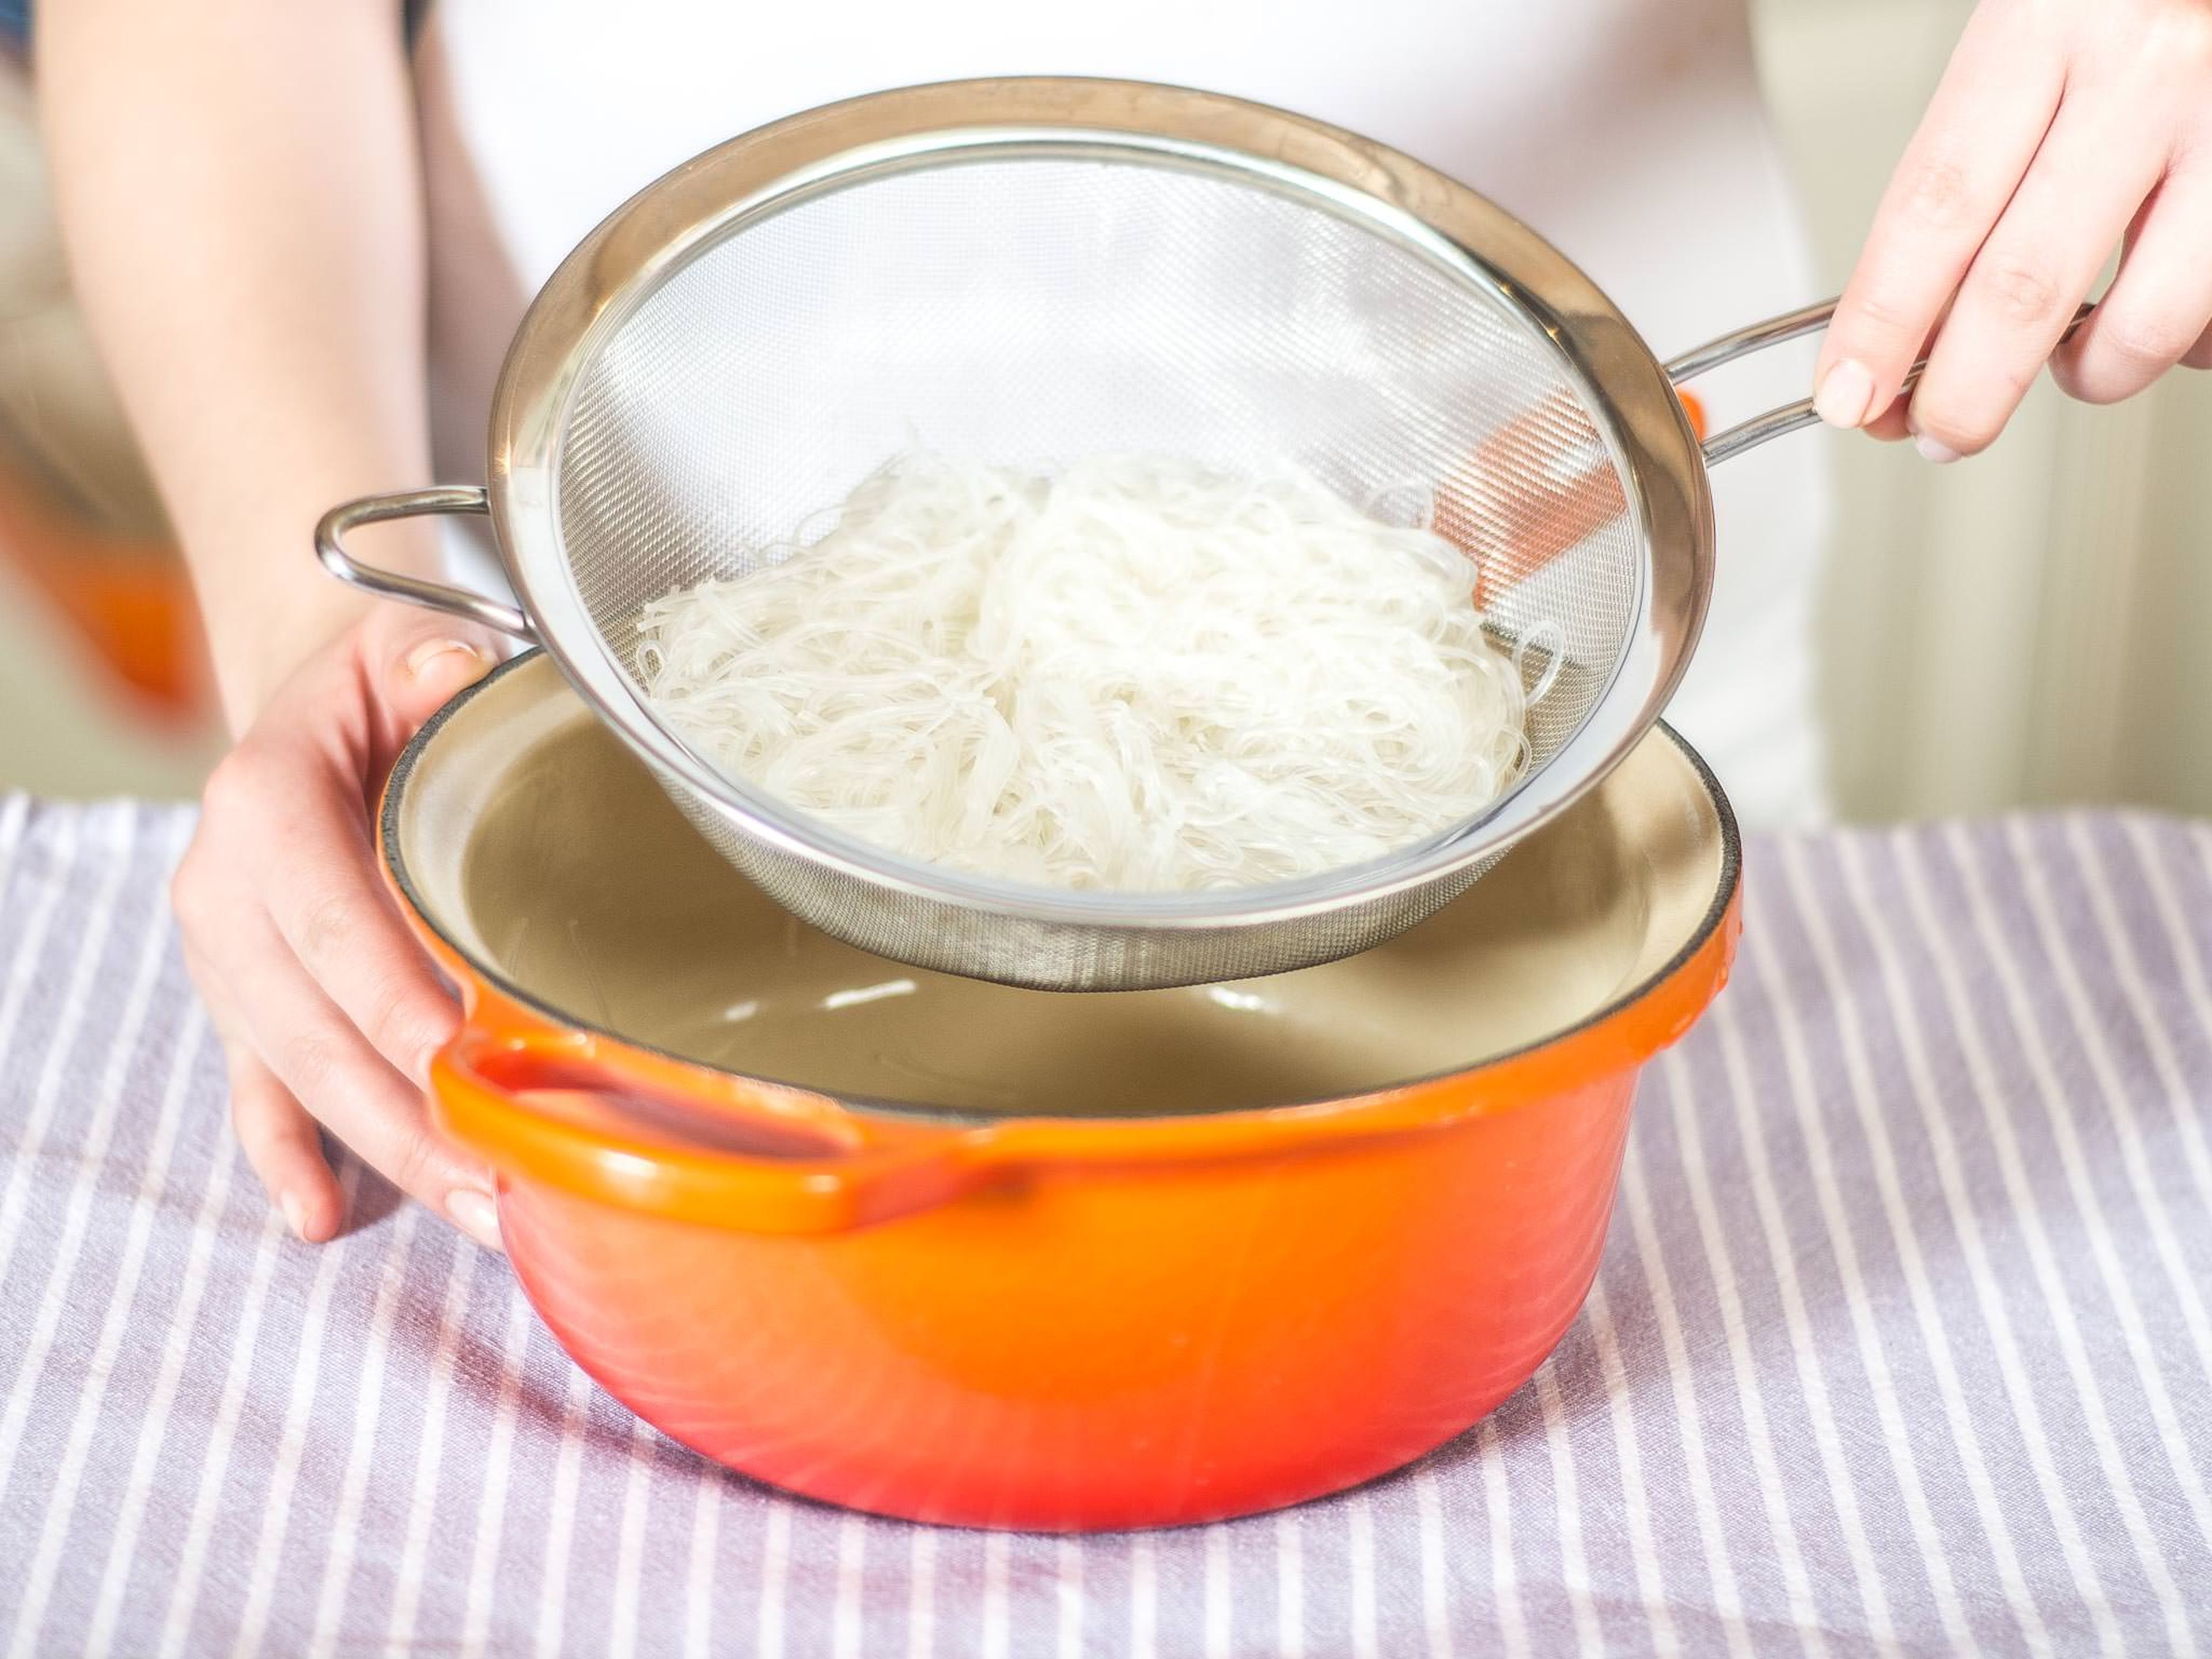 Drain glass noodles and briefly rinse under cold water. Cut shorter with a knife if desired.